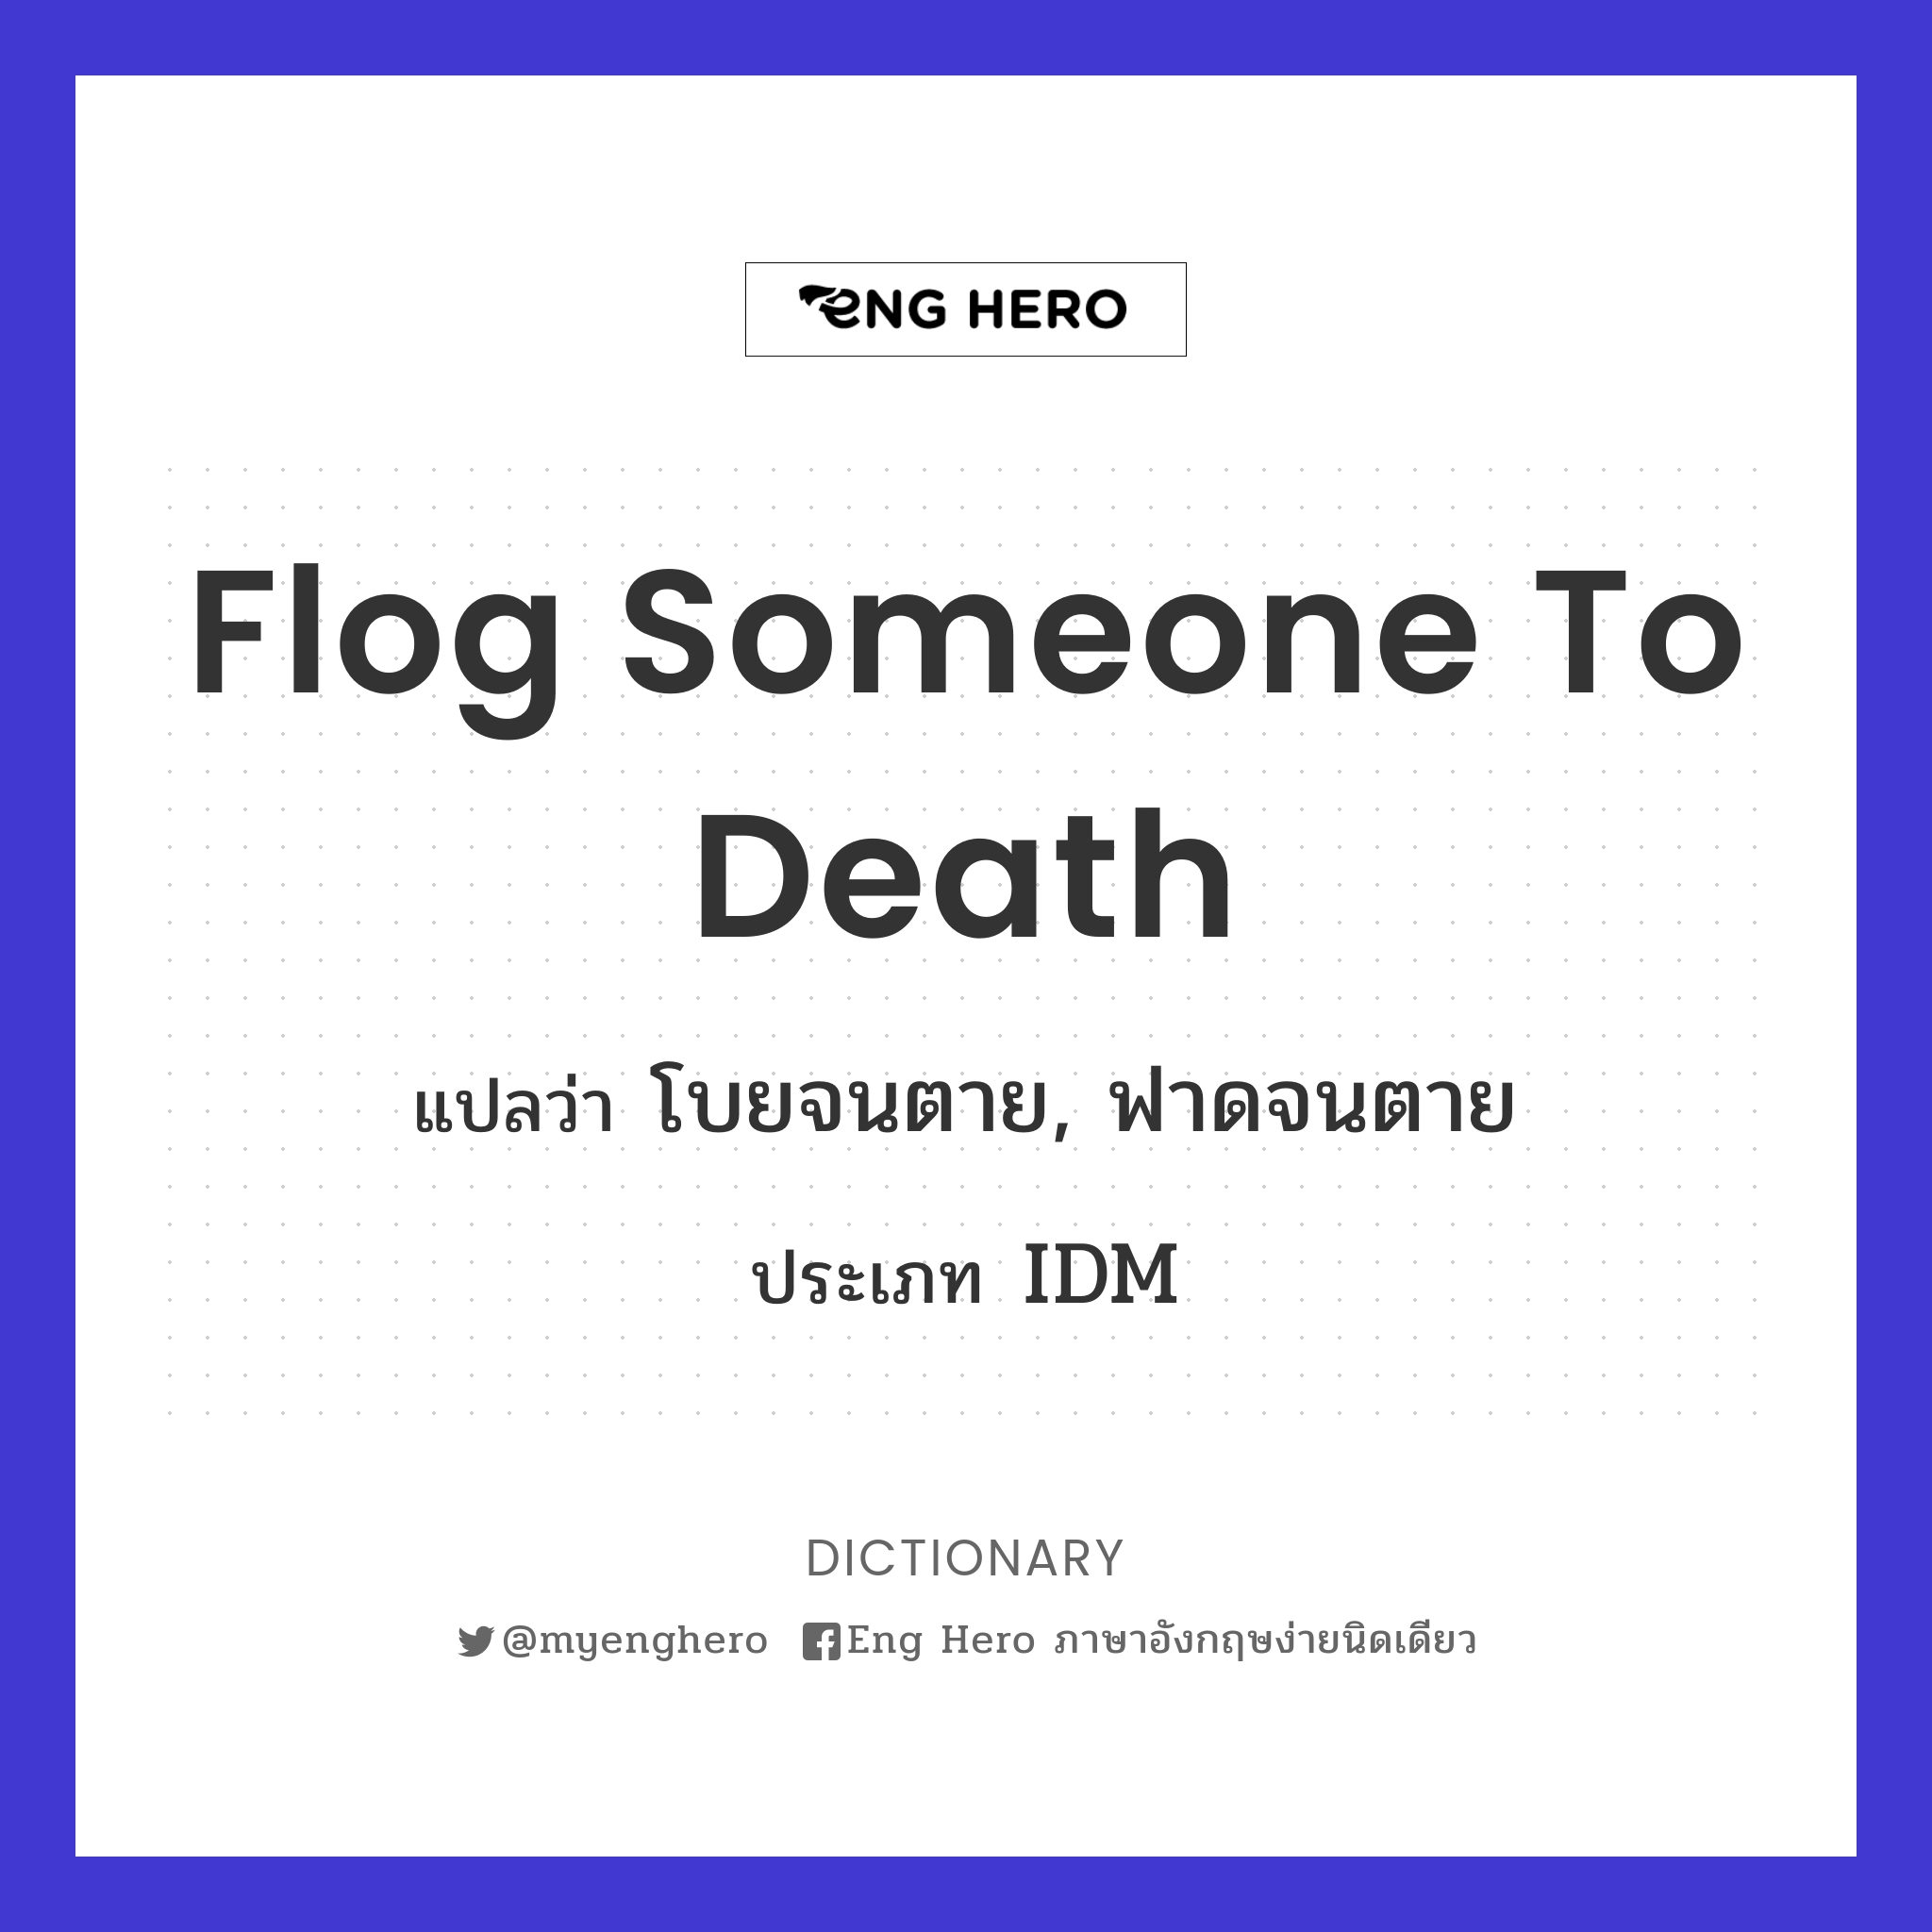 flog someone to death